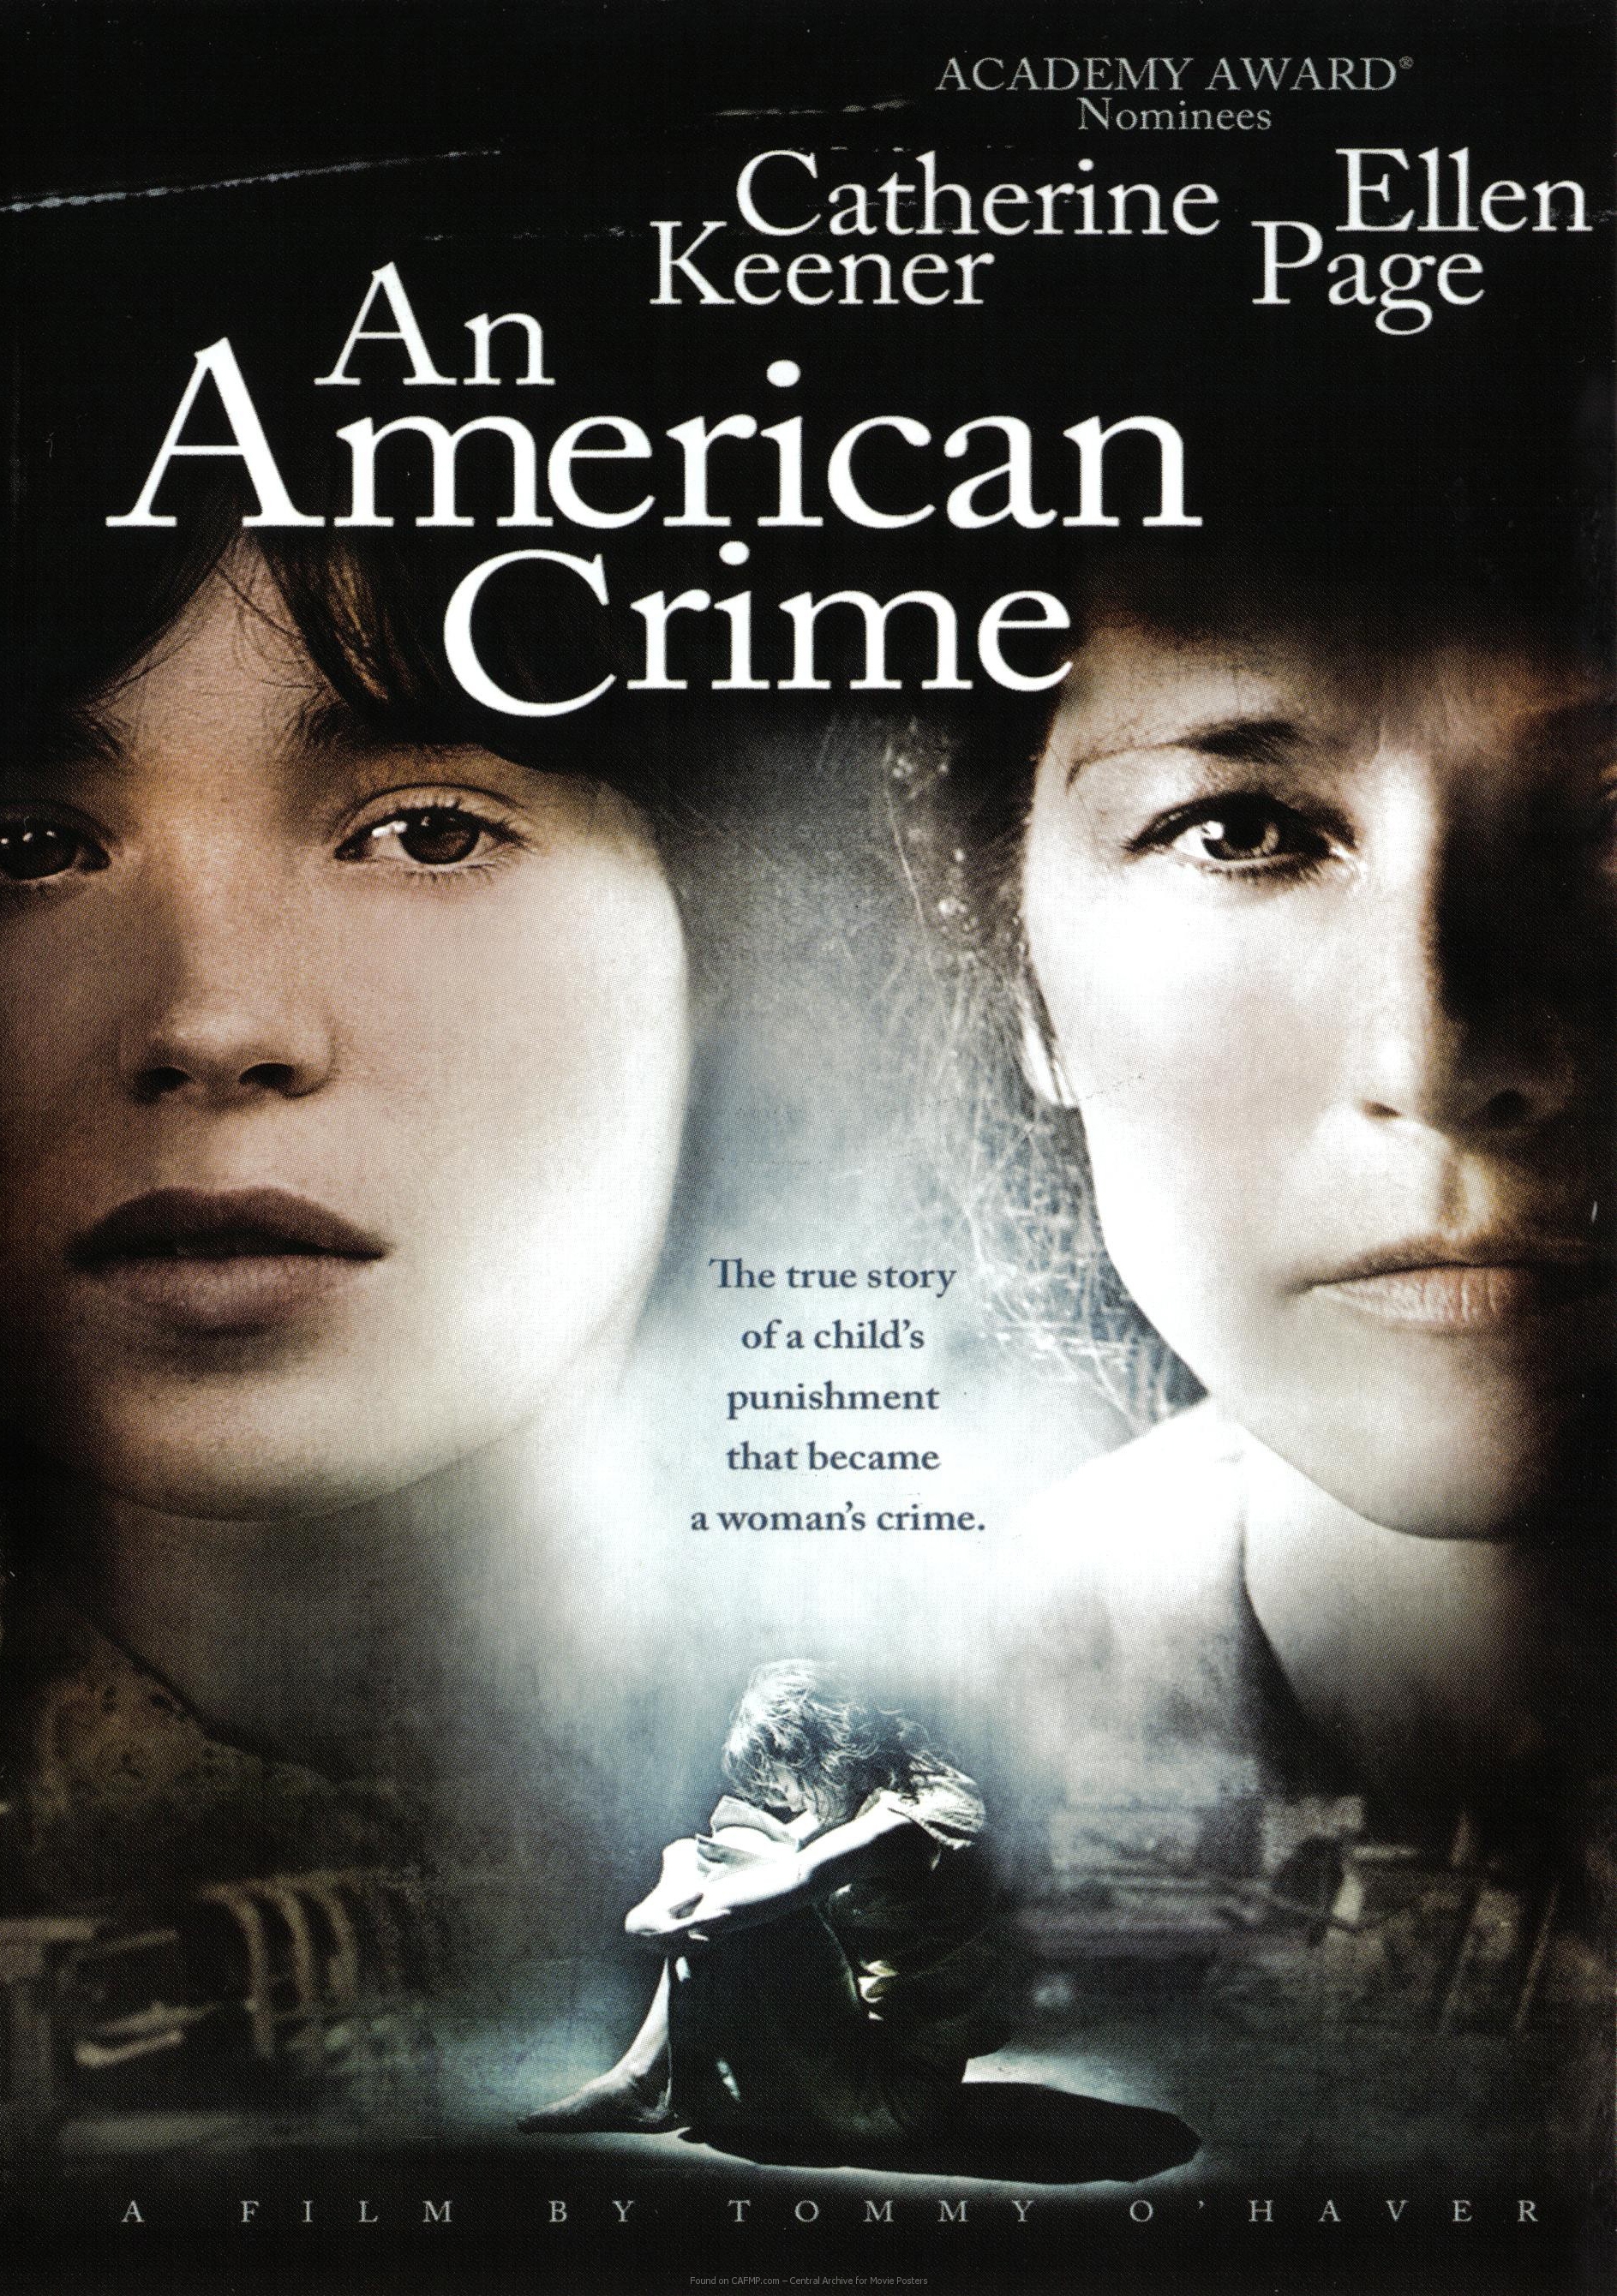 Movie Poster »An American Crime« on CAFMP